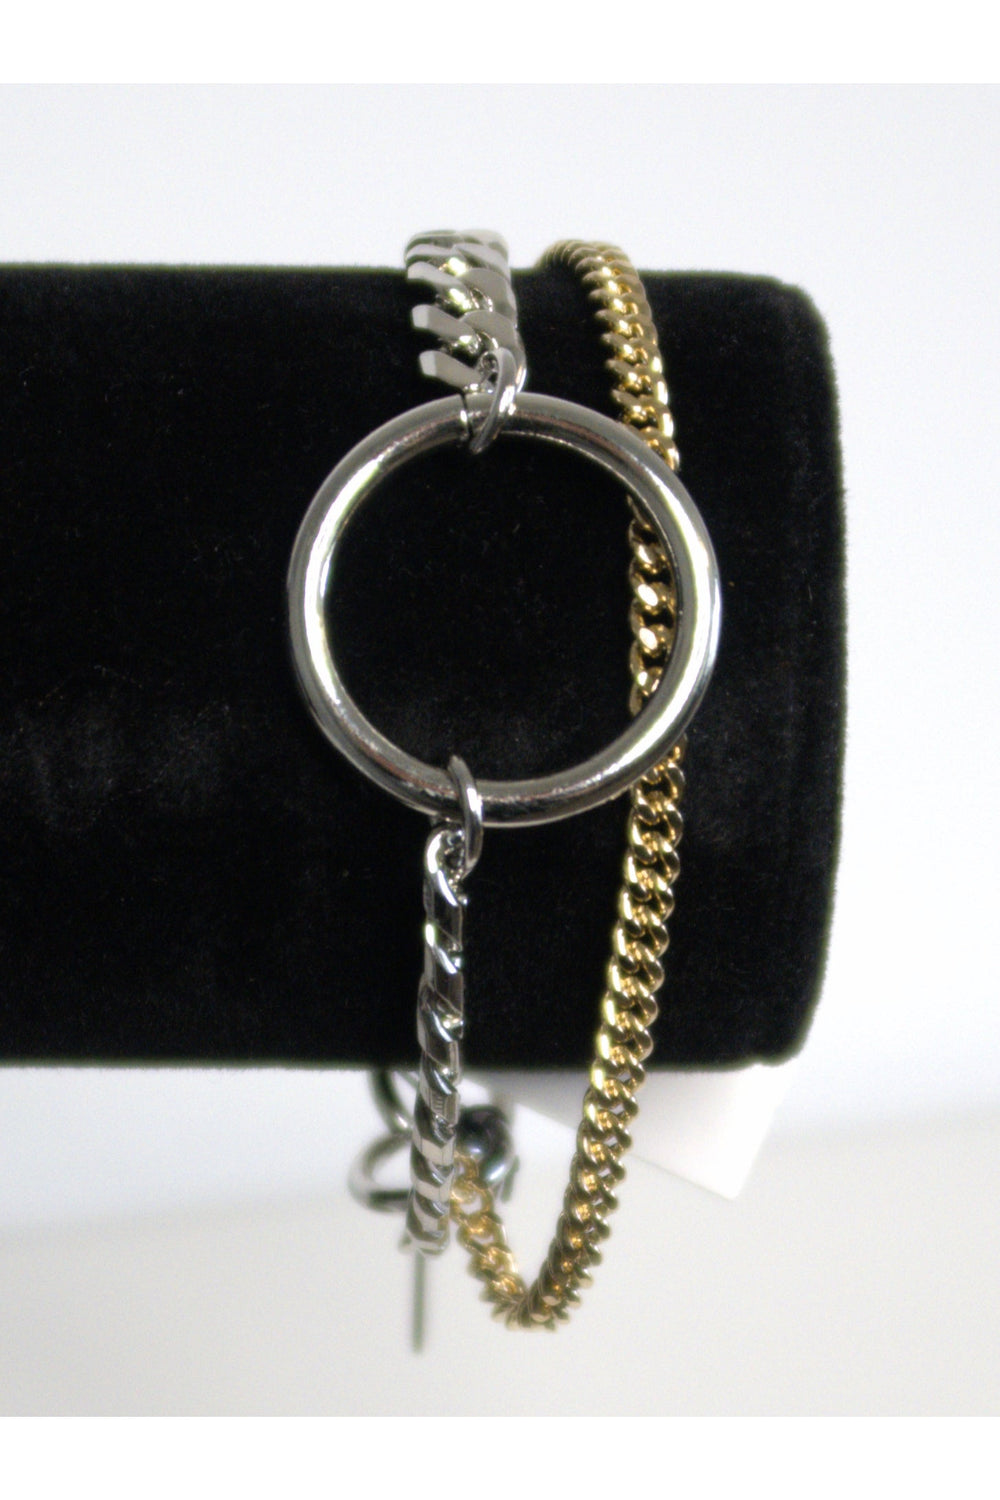 Circle Two-tone Chain Bracelet - Expressive Collective CO.